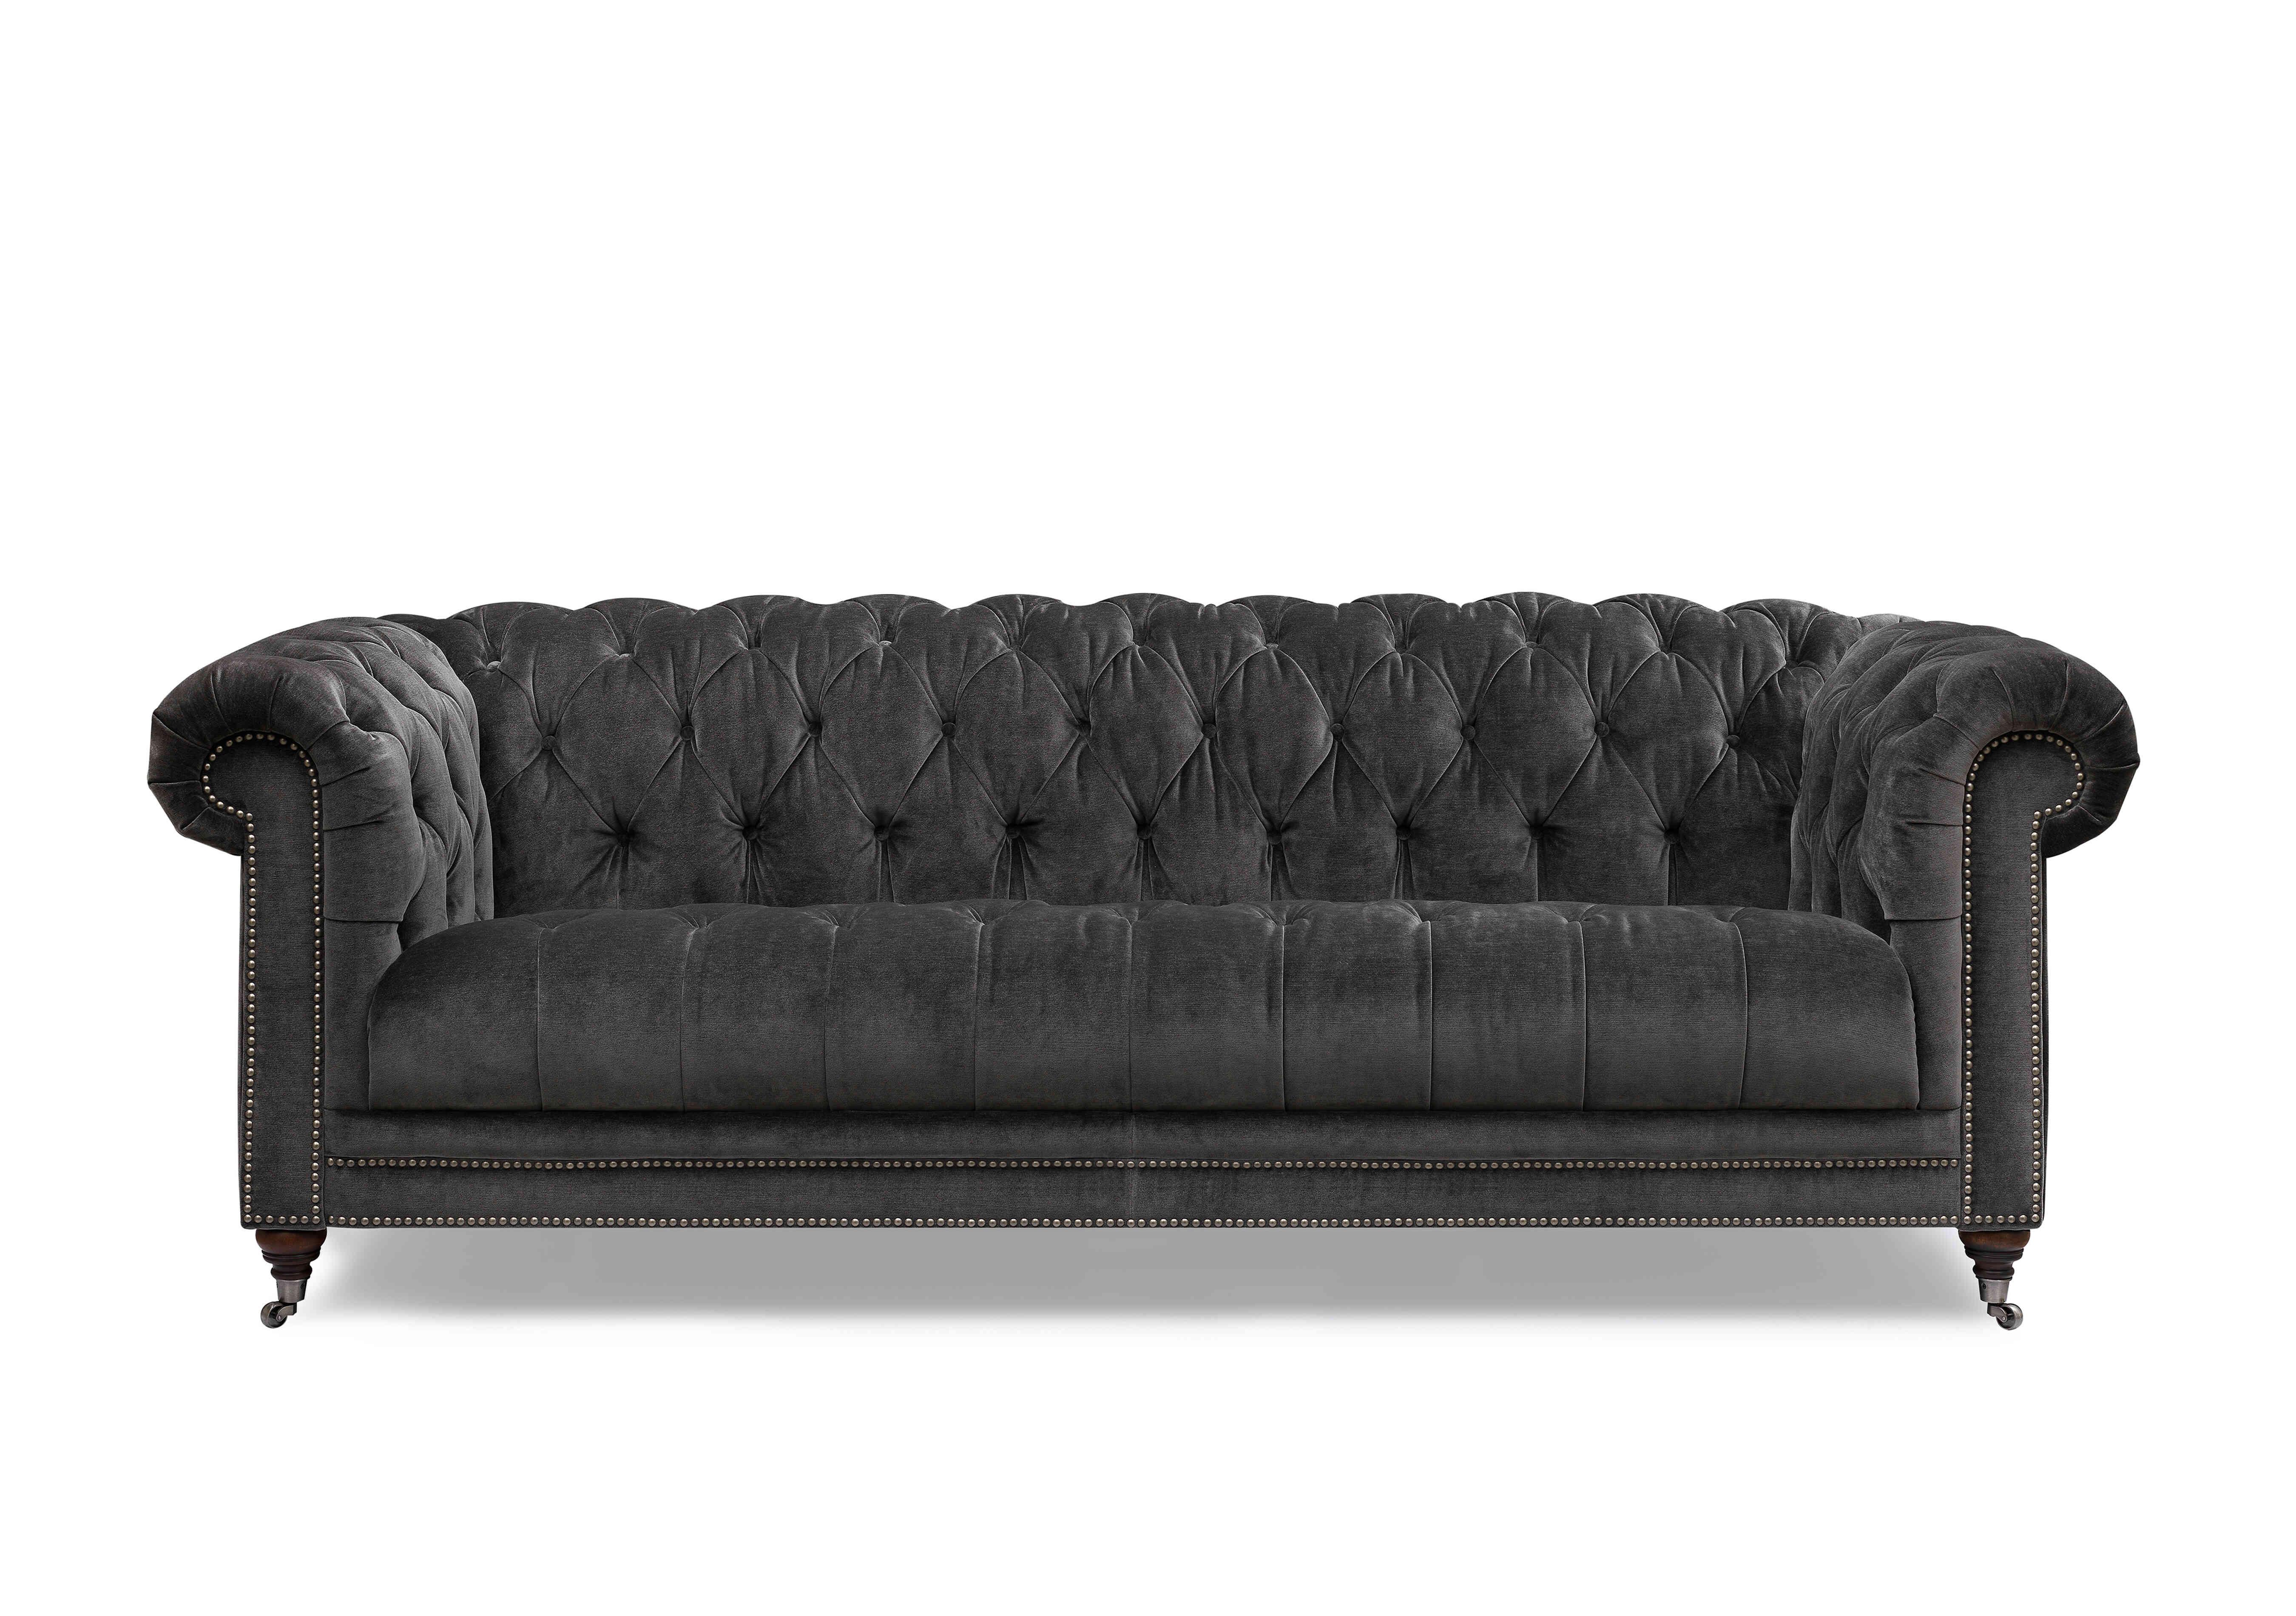 Walter 4 Seater Fabric Chesterfield Sofa in X3y2-W021 Moonstone on Furniture Village